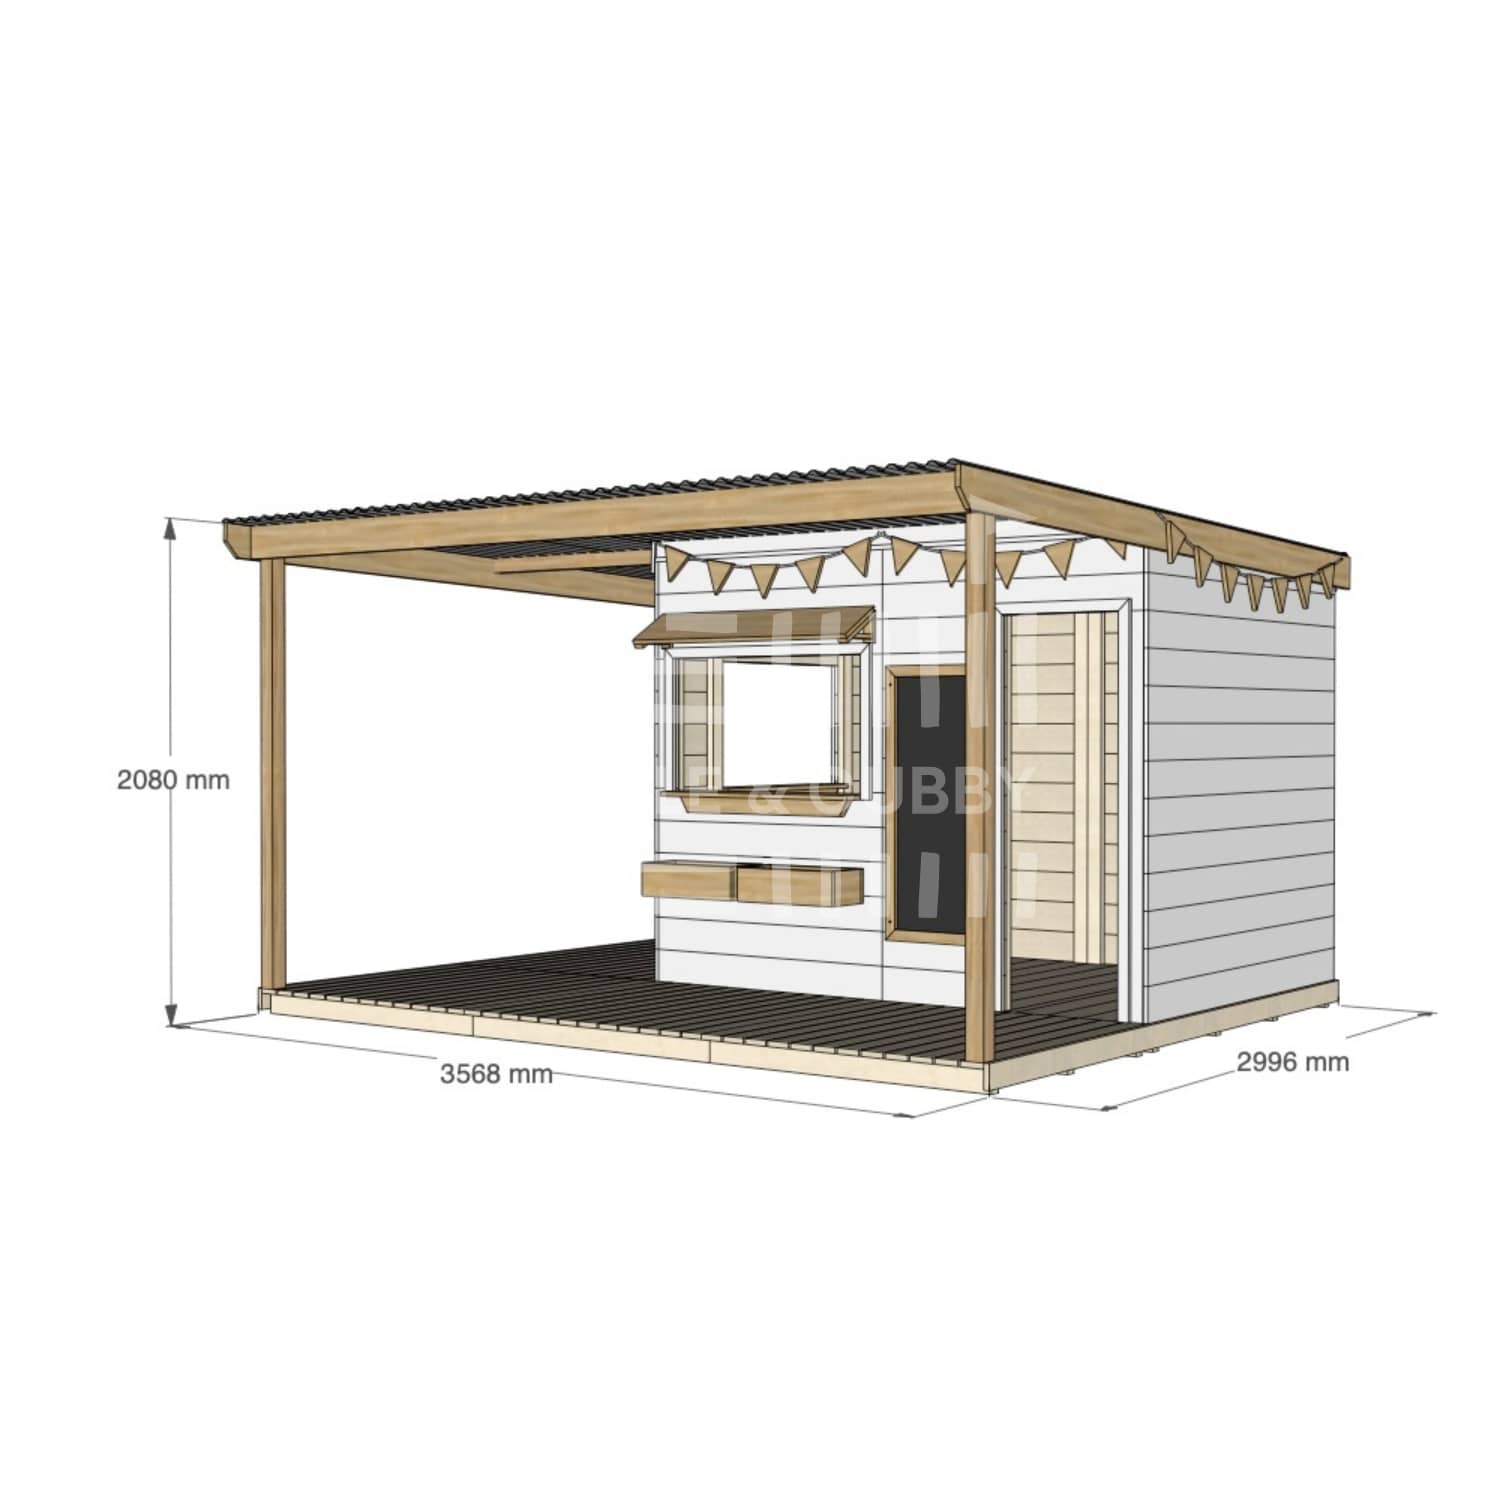 Commercial grade extended height painted large square timber cubby house with wraparound verandah and accessories